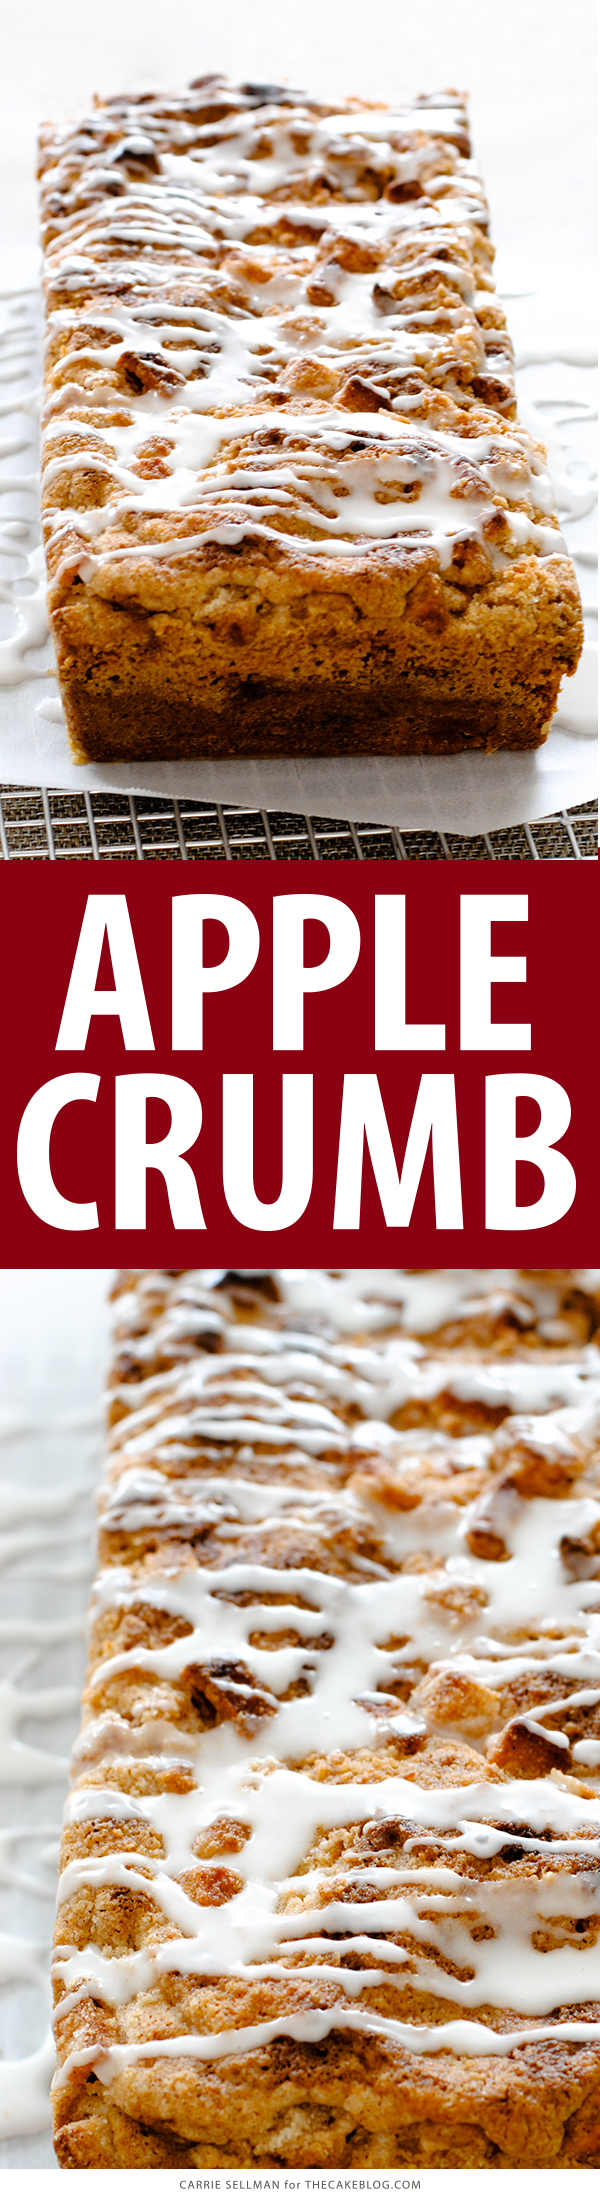 Apple Crumb Cake with chunks of fresh apple, cinnamon and a double crumble topping | Carrie Sellman for TheCakeBlog.com